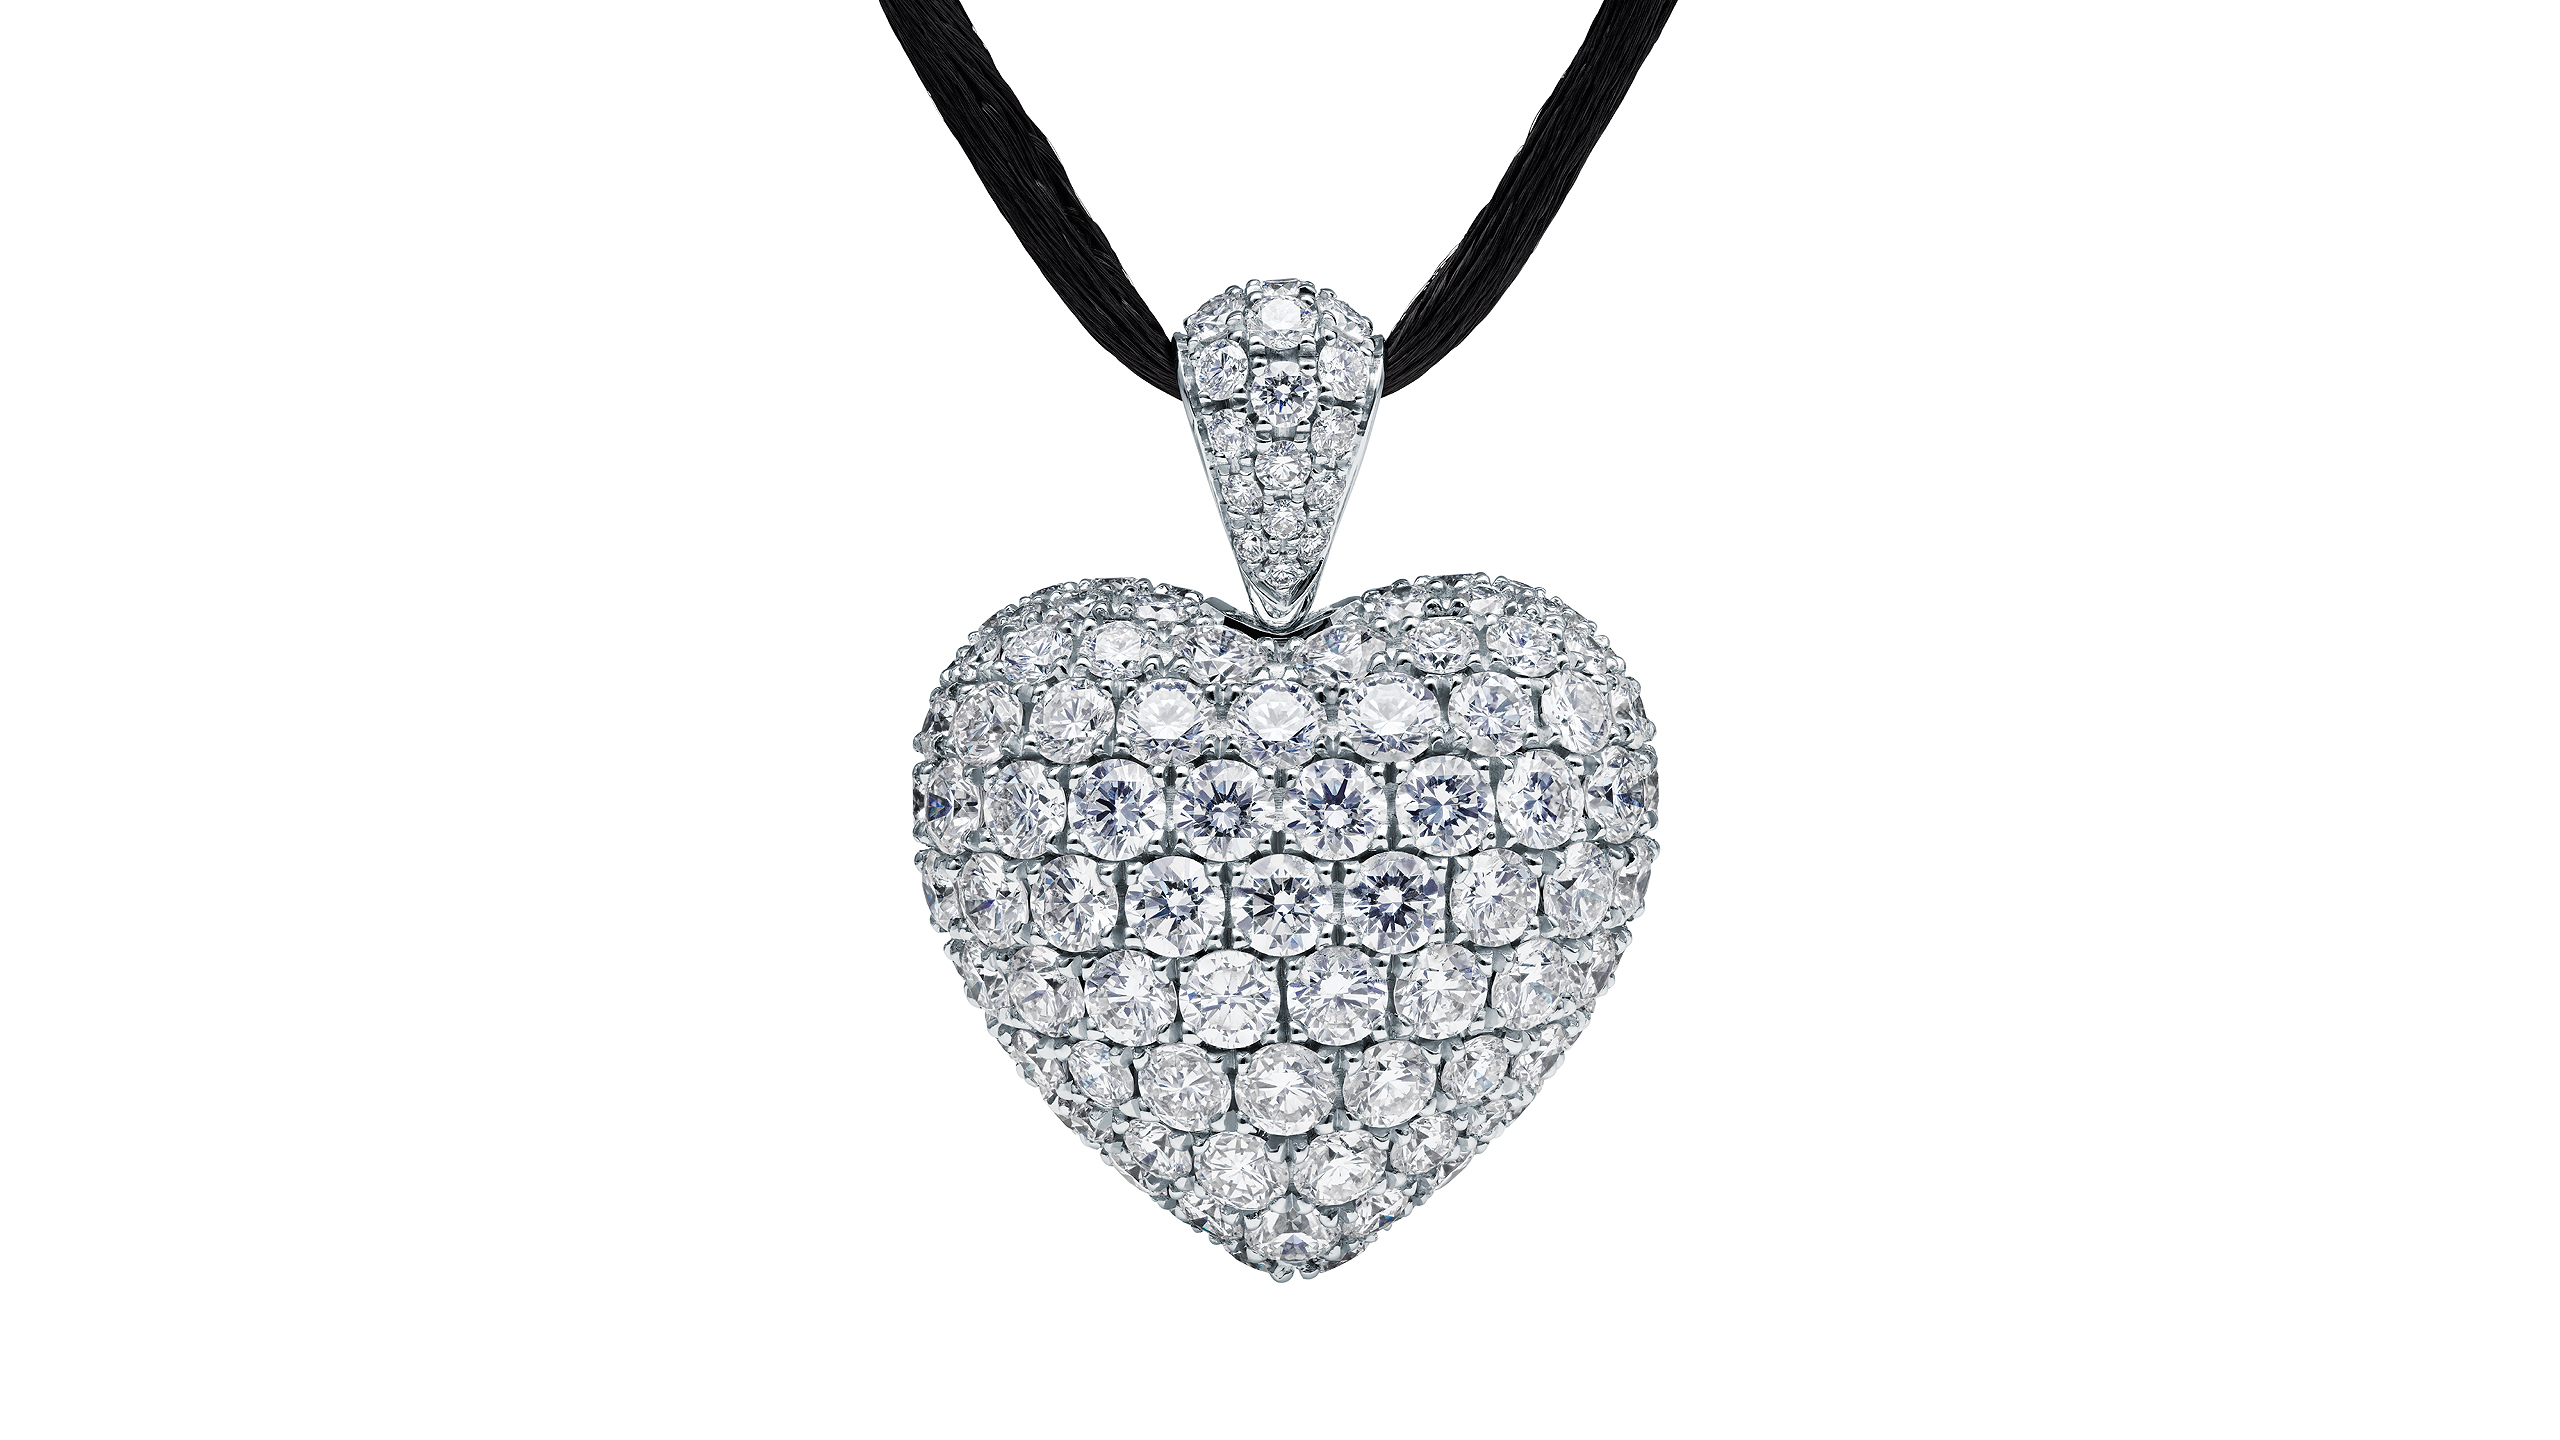 https://towejewels.com/wp-content/uploads/2015/06/Diamond_heart_Large_front_ny_OK_2560x1440_overview_web.jpg